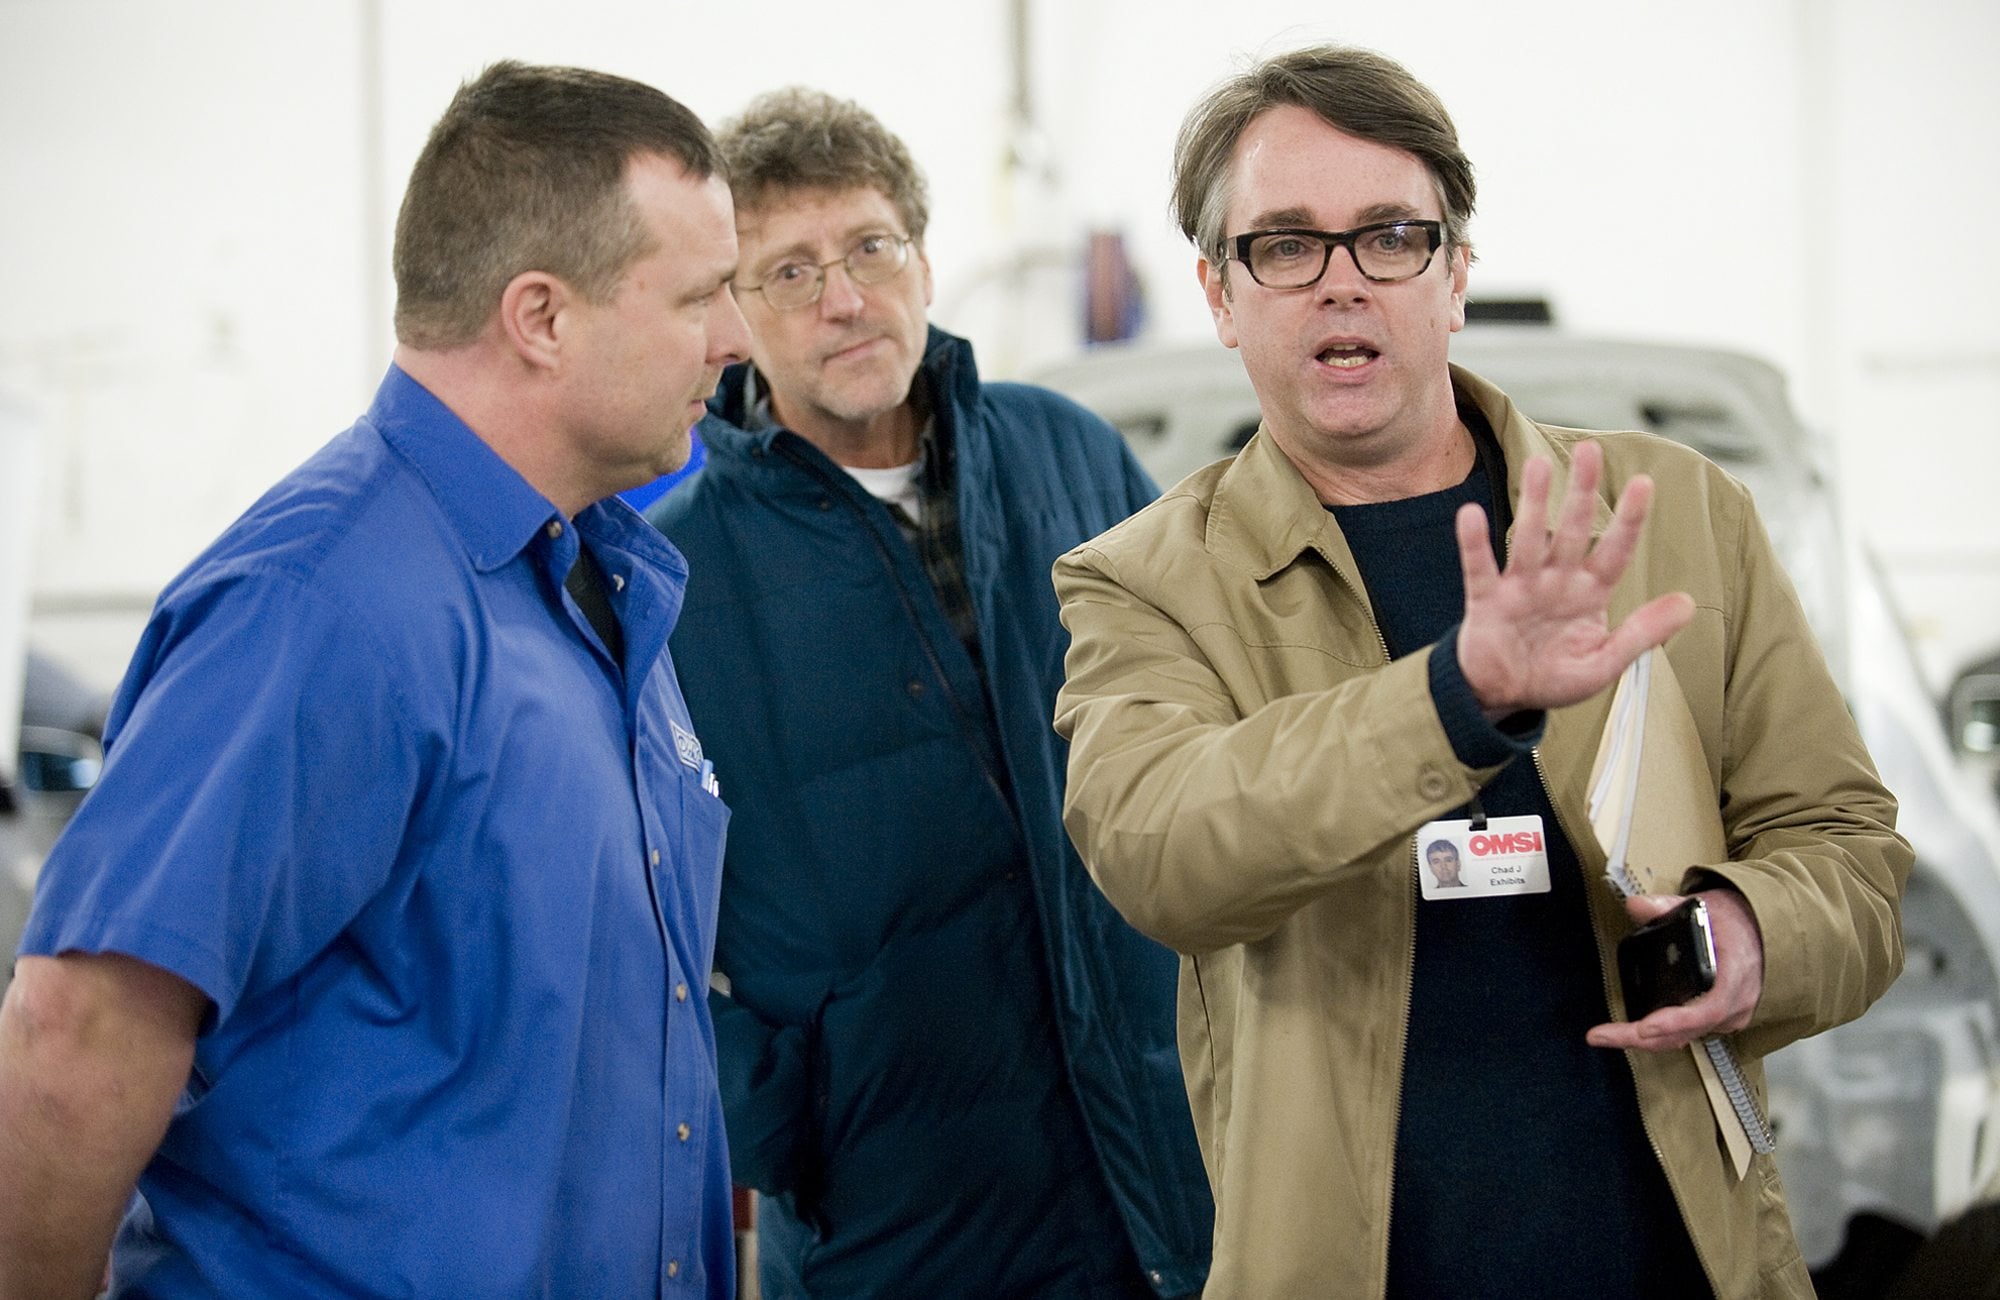 Dick Hannah Collision Center Director Rick Stoker, left, leads Oregon Museum of Science and Industry design manager Chad Jacobsen, right, and OMSI project manager Denny Andersen on a tour of the collision center to show examples of today's automobile technology.